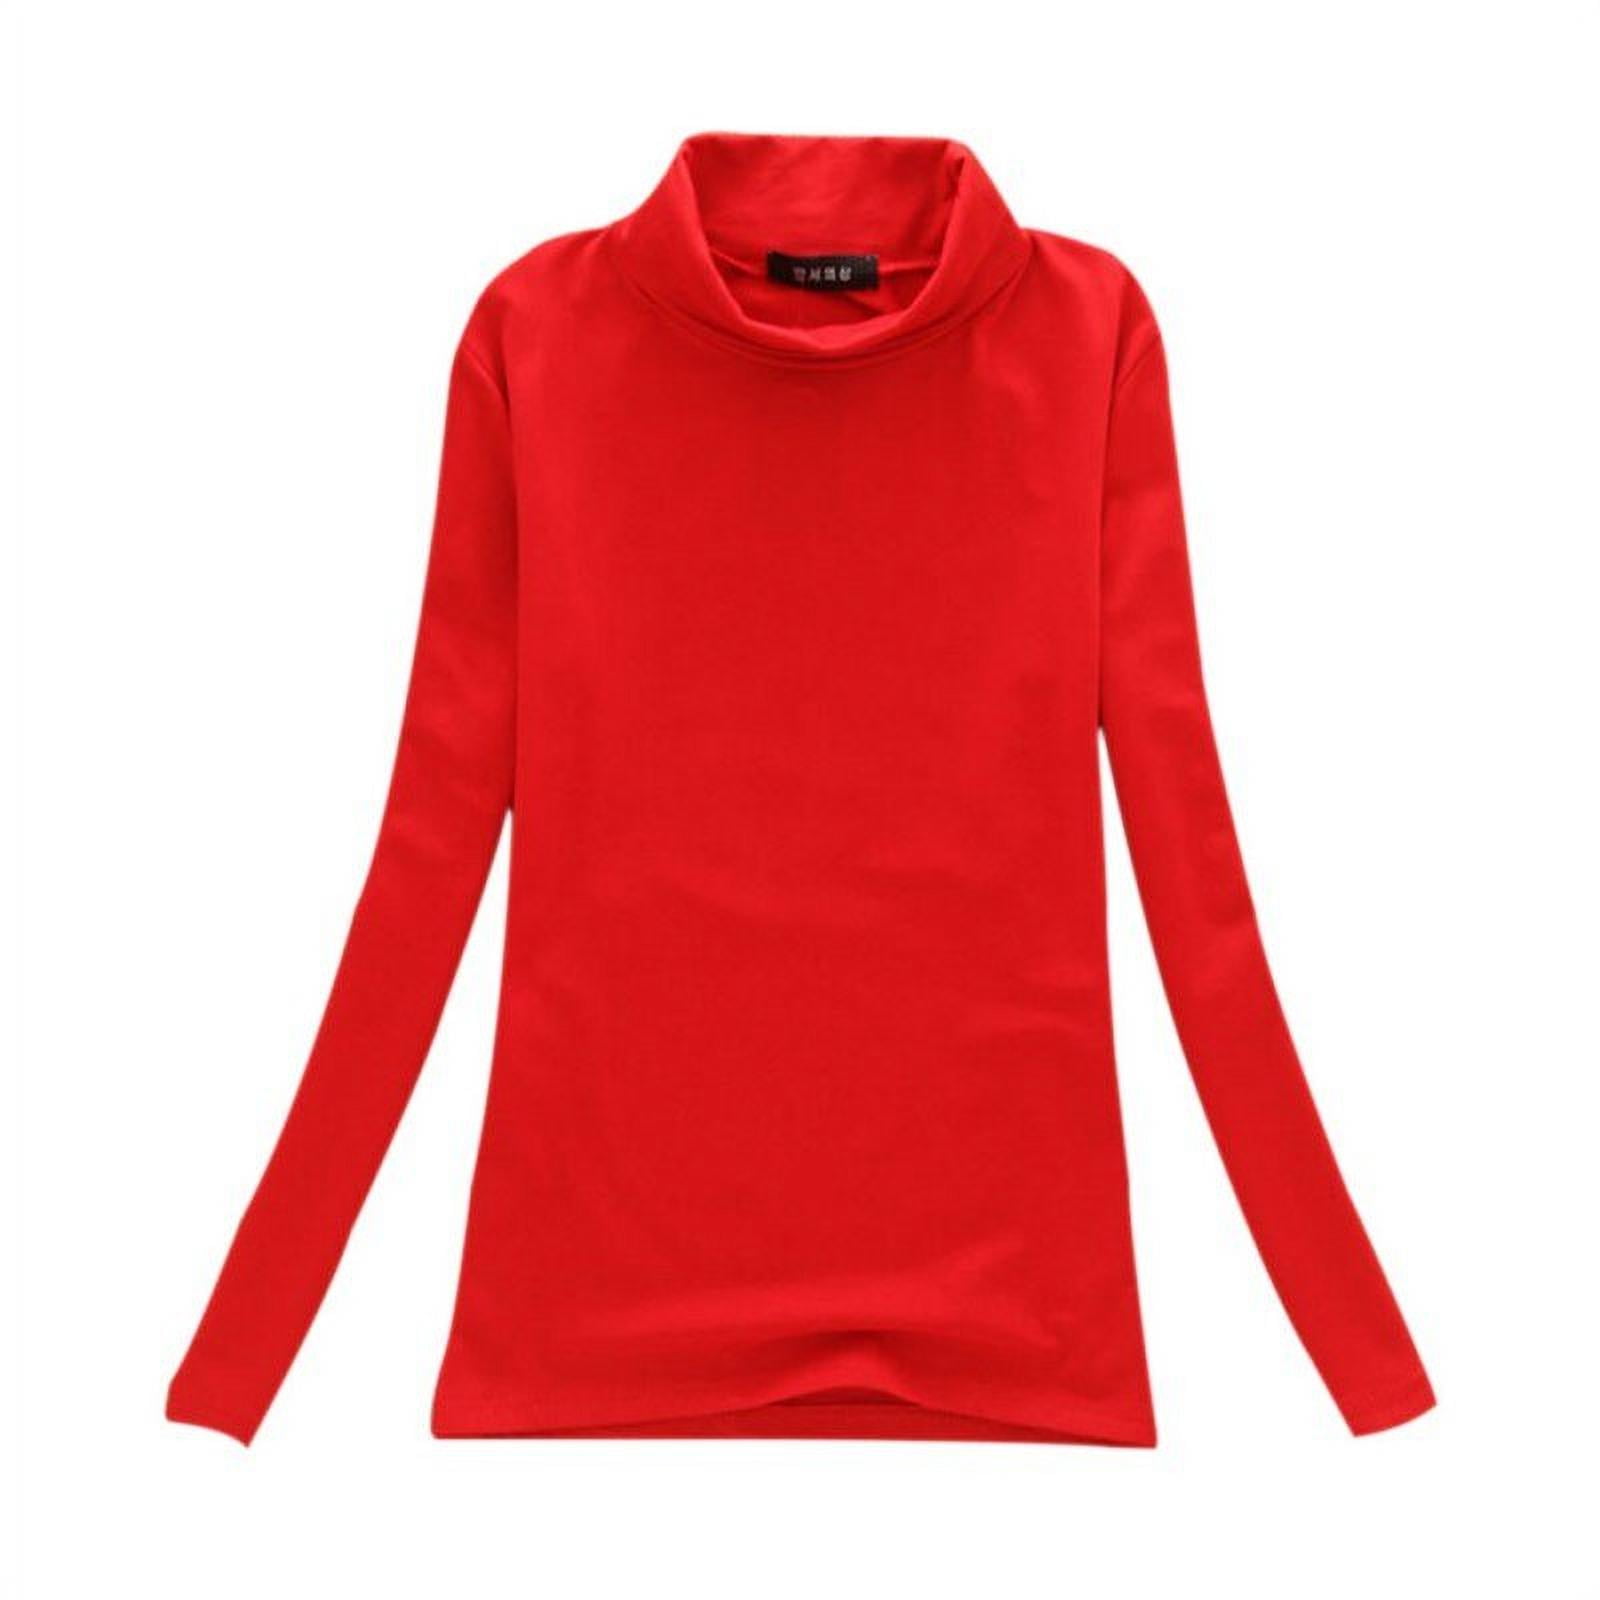 Zonghan New Style Fashion Women Long Sleeve Turtleneck Tops Cotton